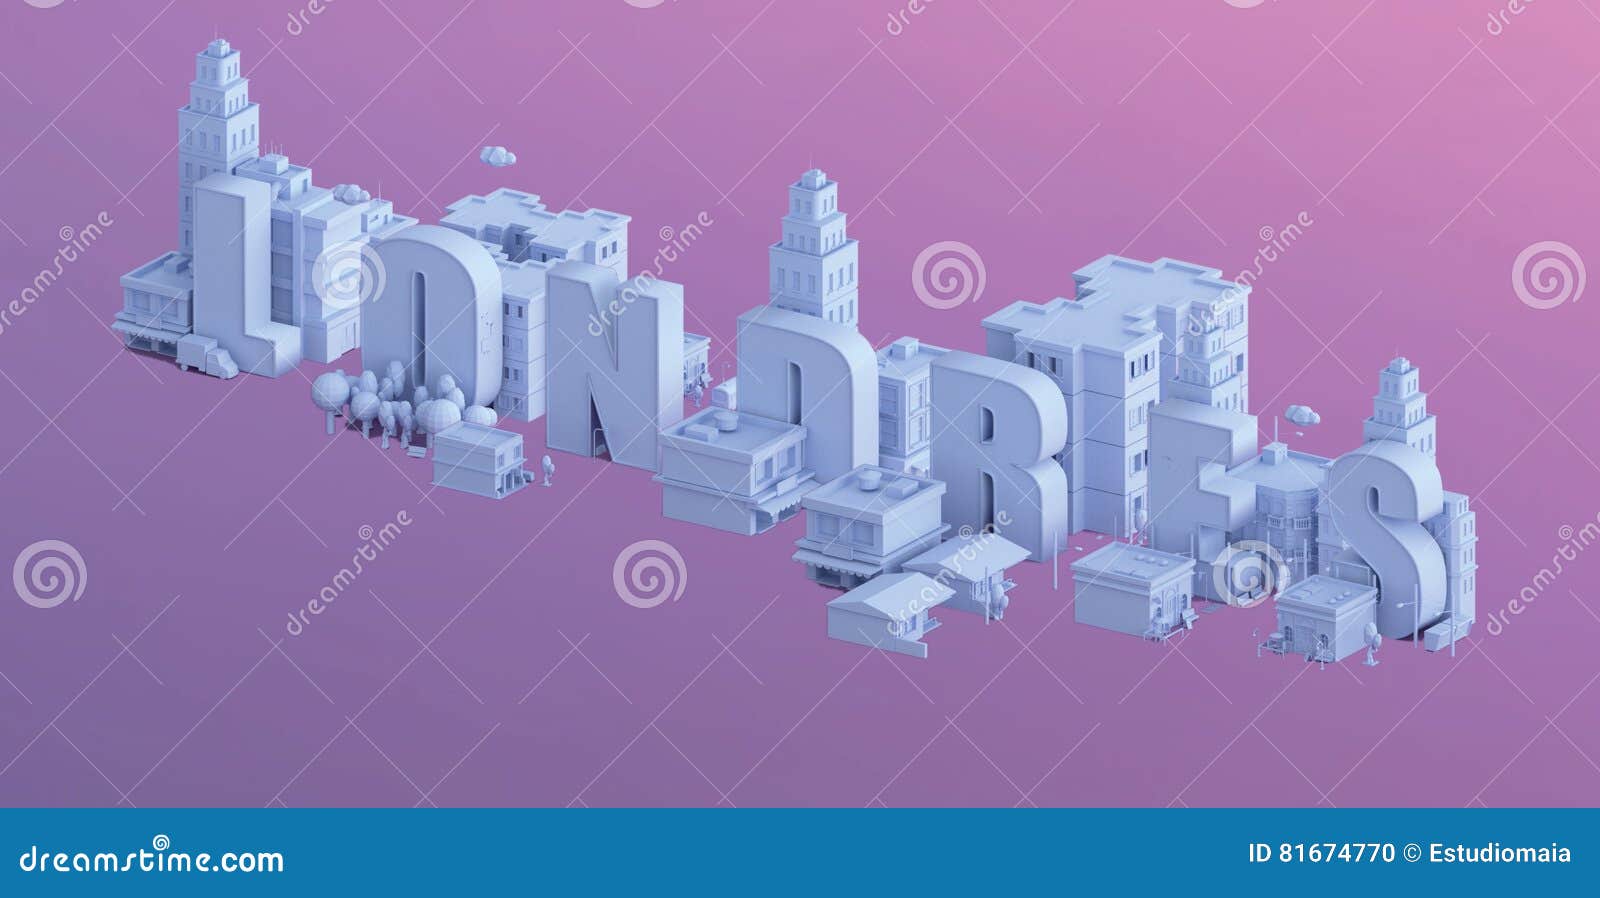 3d render of a mini city, typography 3d of the name londres